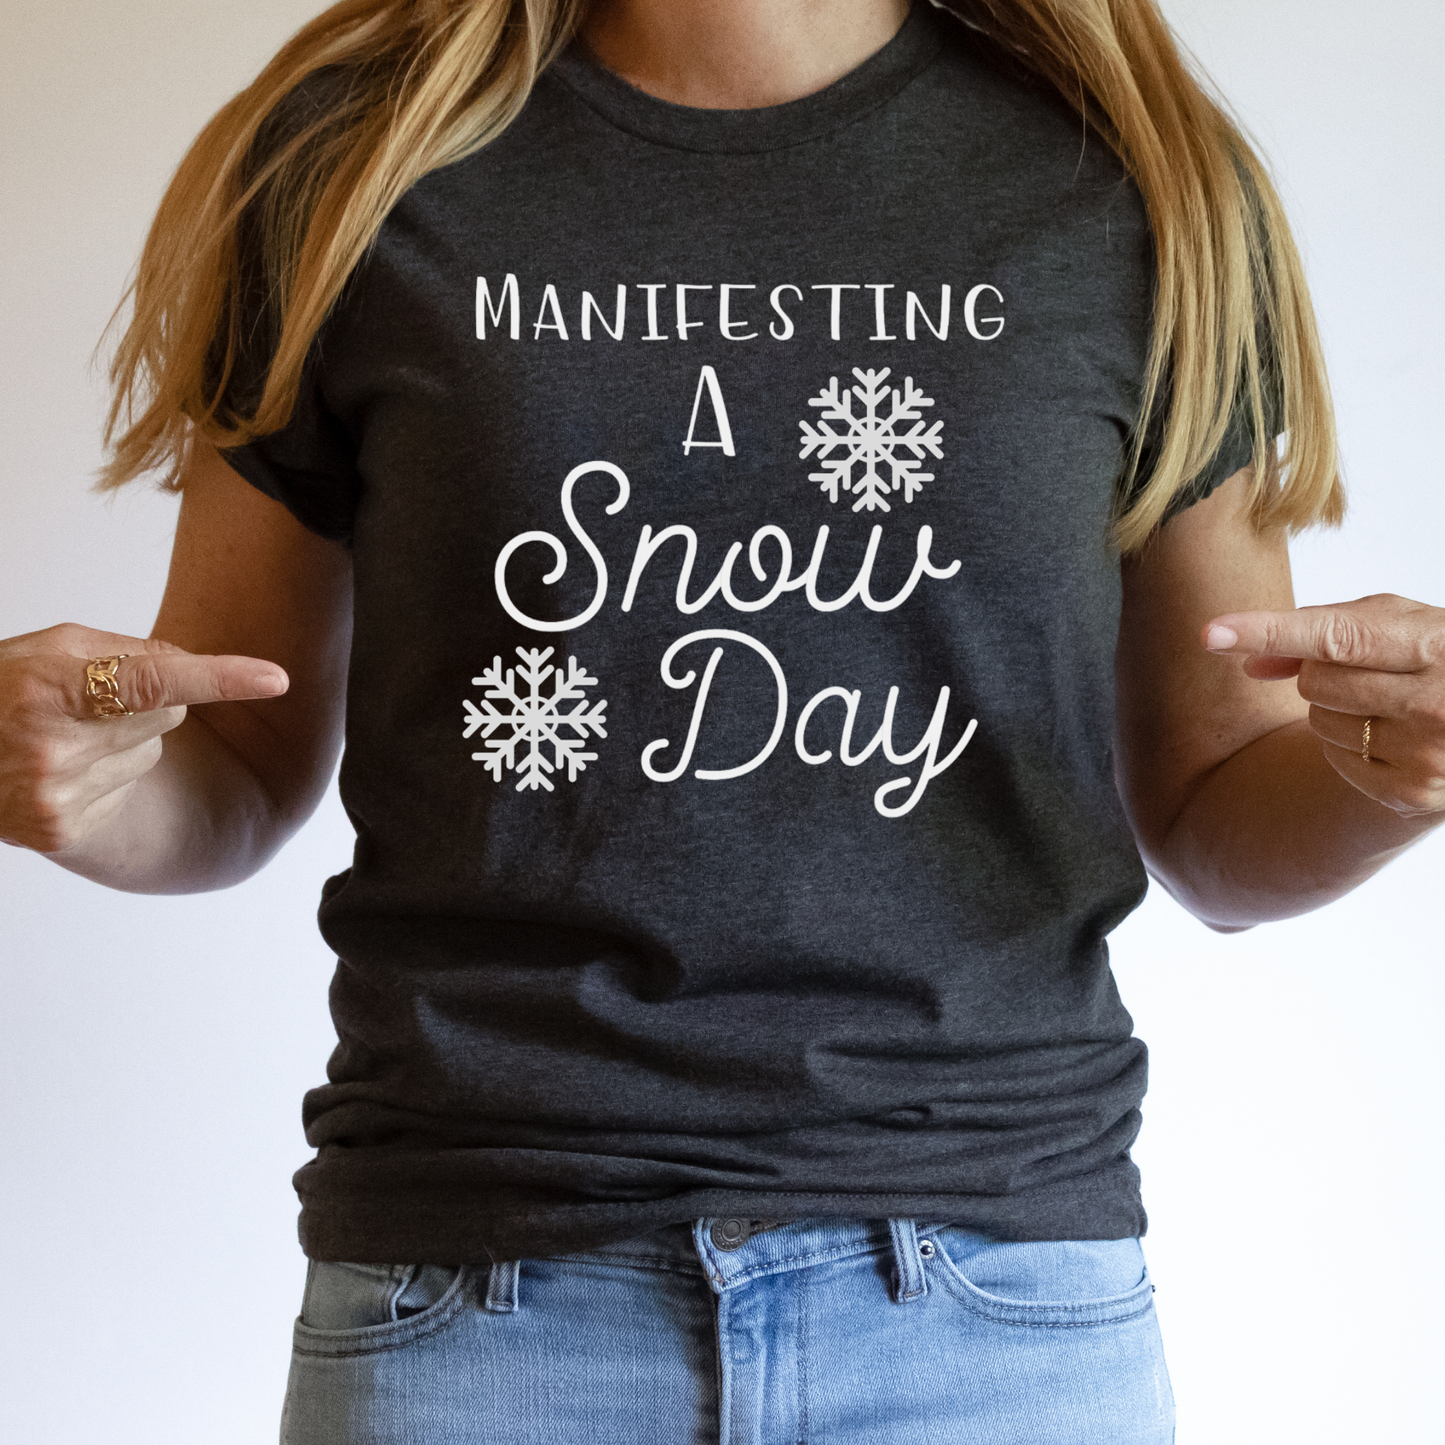 MANIFESTING A SNOW DAY T-SHIRT OR PICK FROM 200 COLOR & STYLE OPTIONS! - TAT 4-7 DAYS